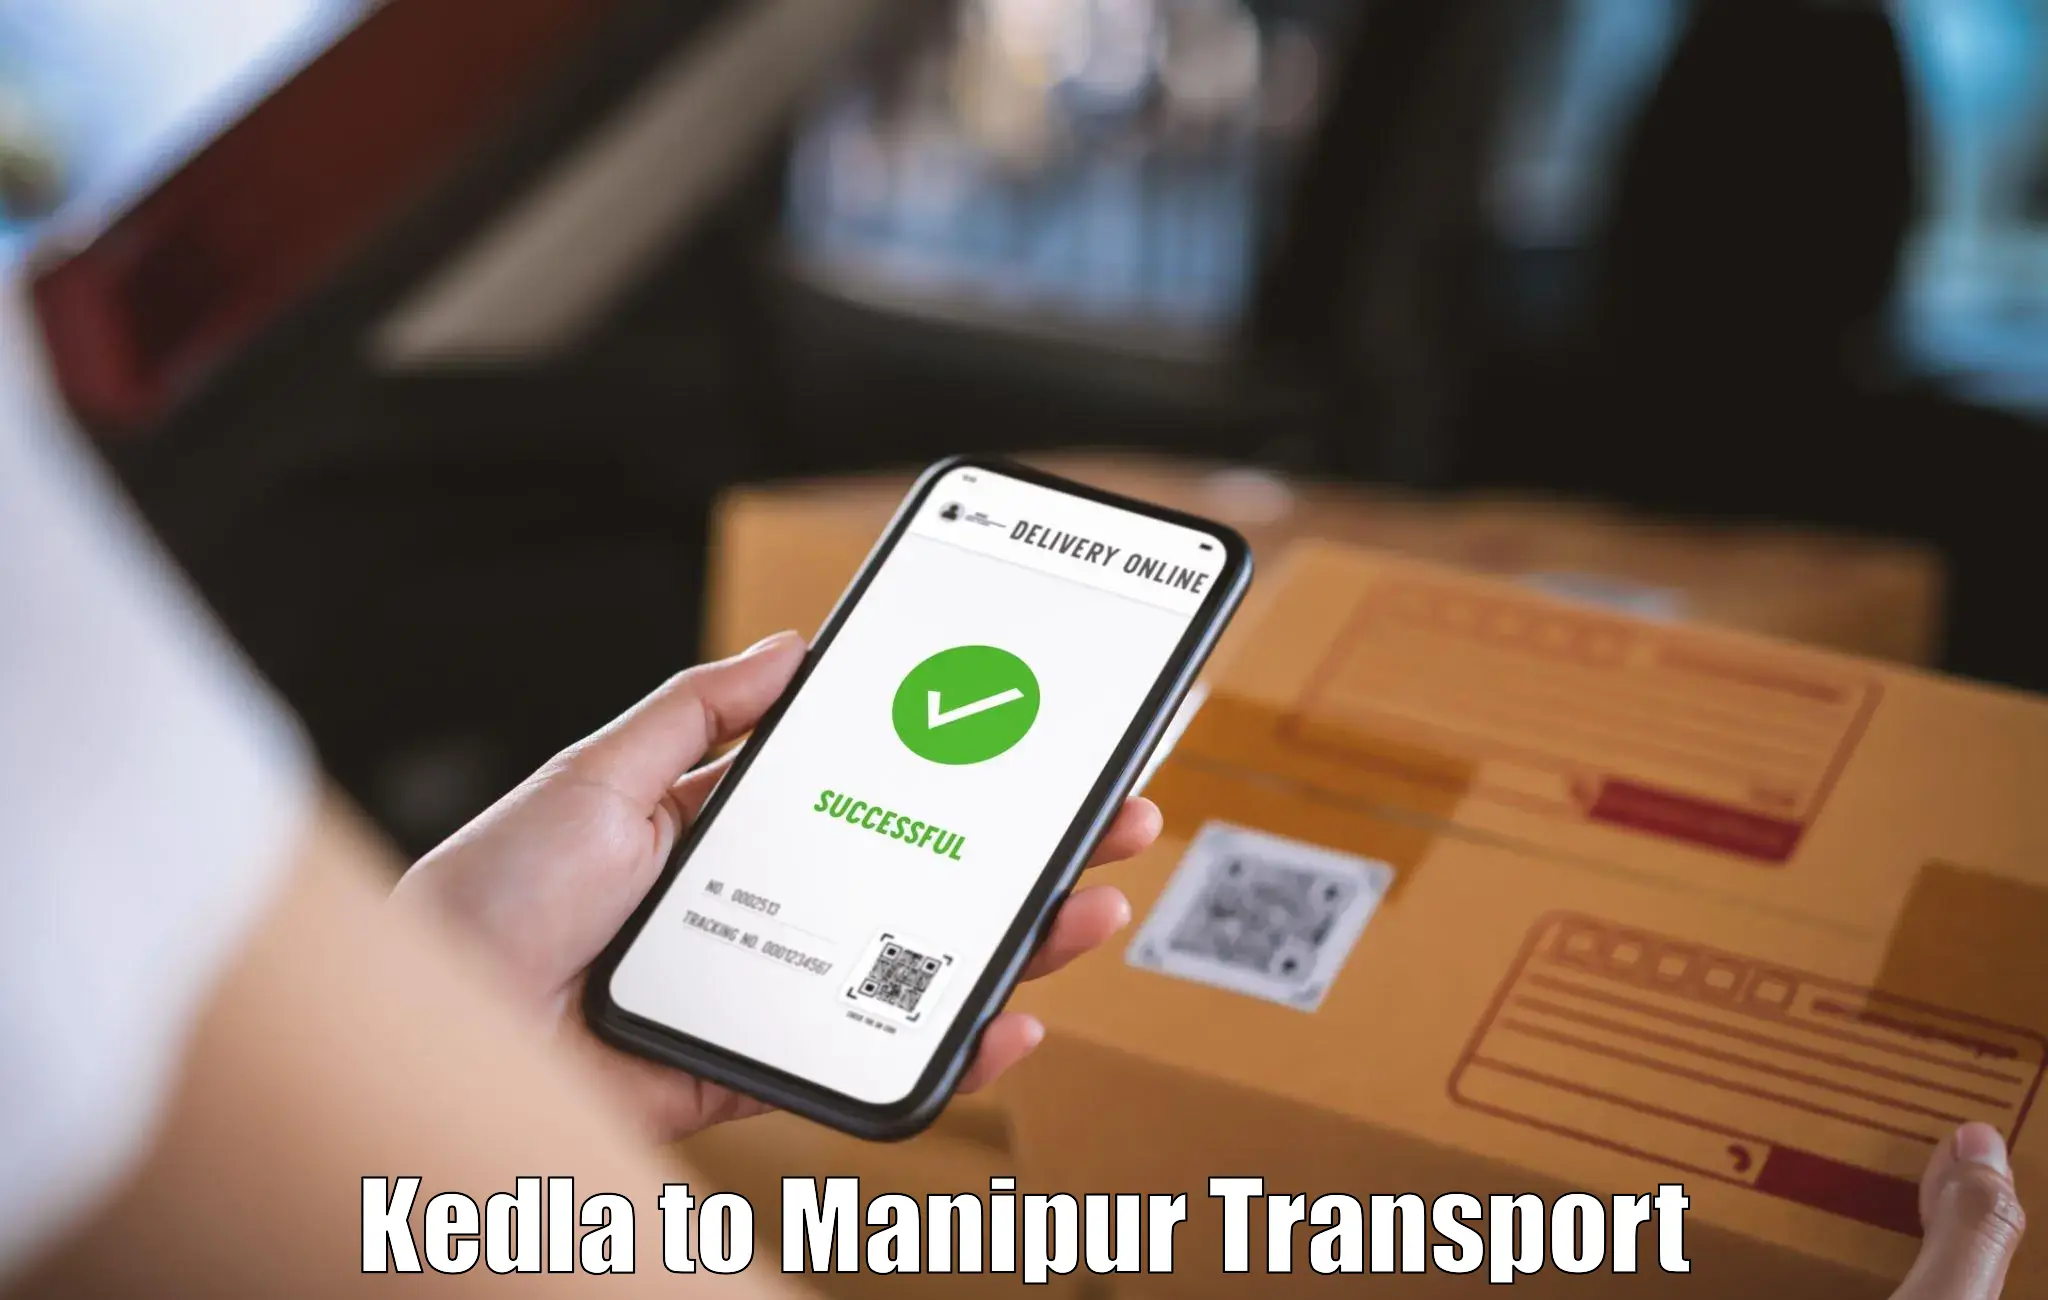 Truck transport companies in India Kedla to Manipur